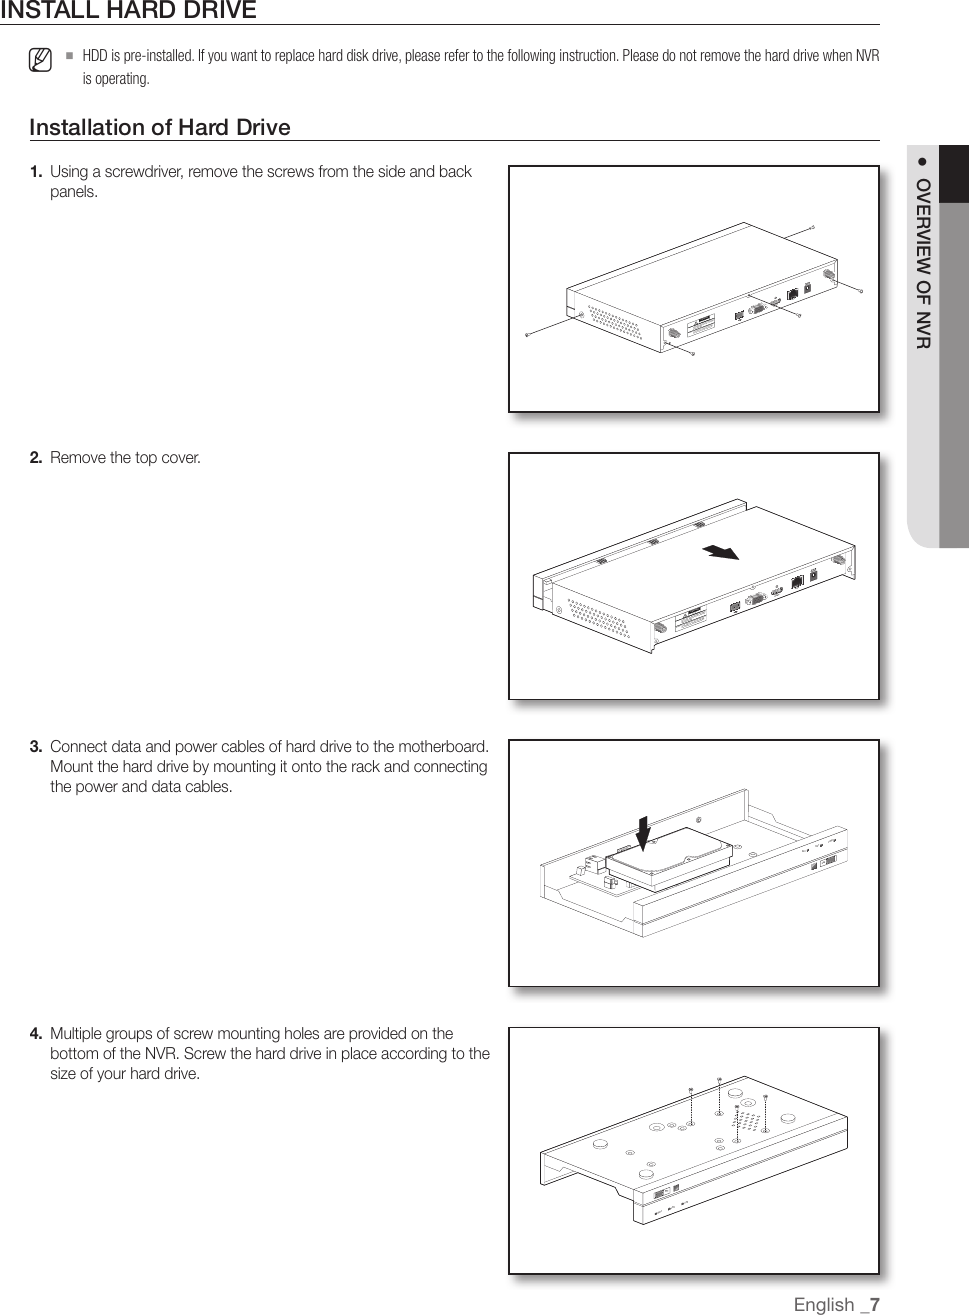 Page 7 of Hanwha Techwin SNR73201W 4 Channel Wireless NVR User Manual 